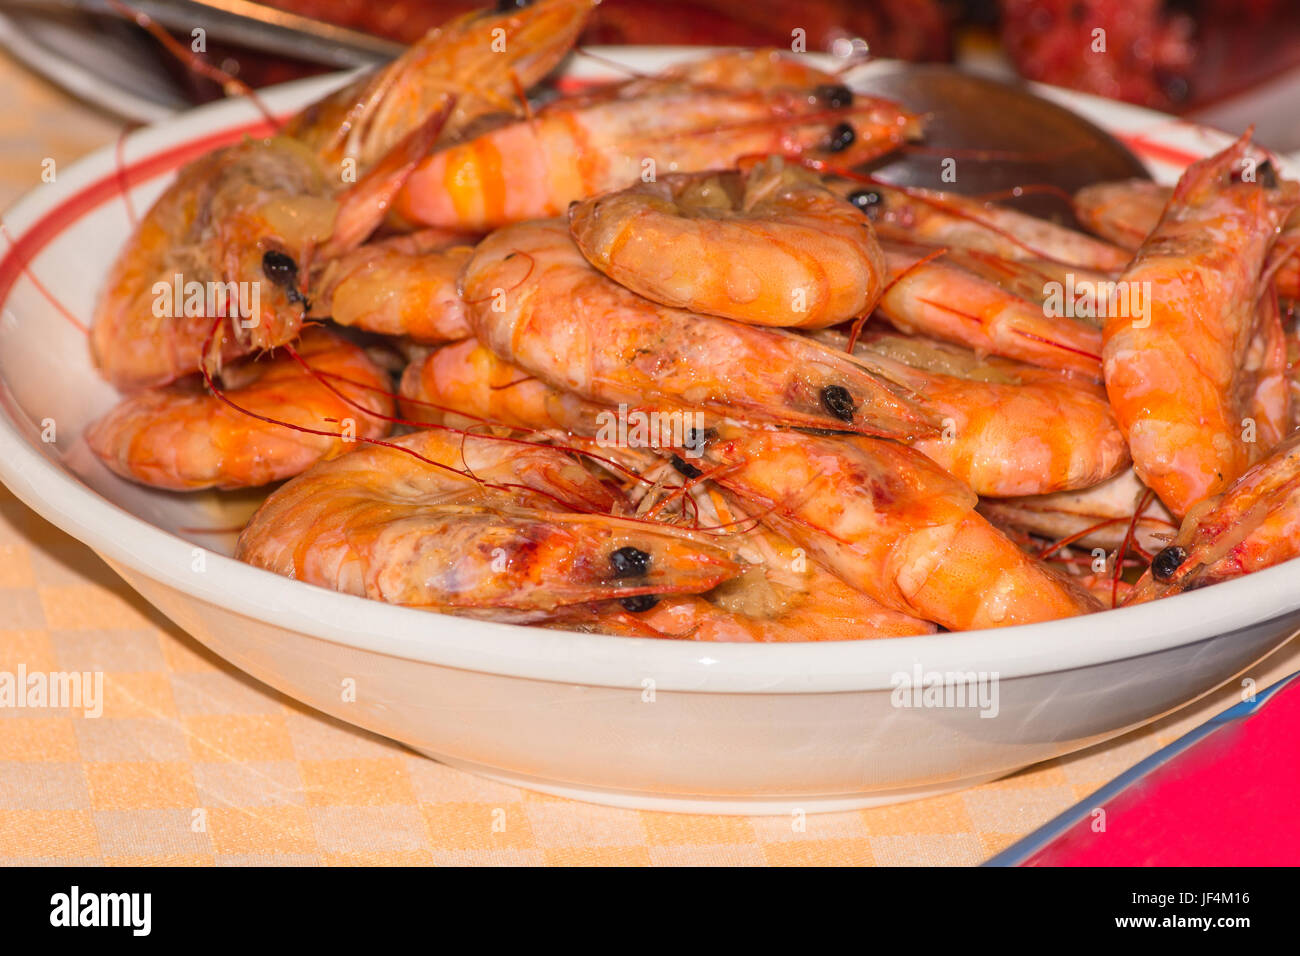 Grilled prawns on a plate. Stock Photo